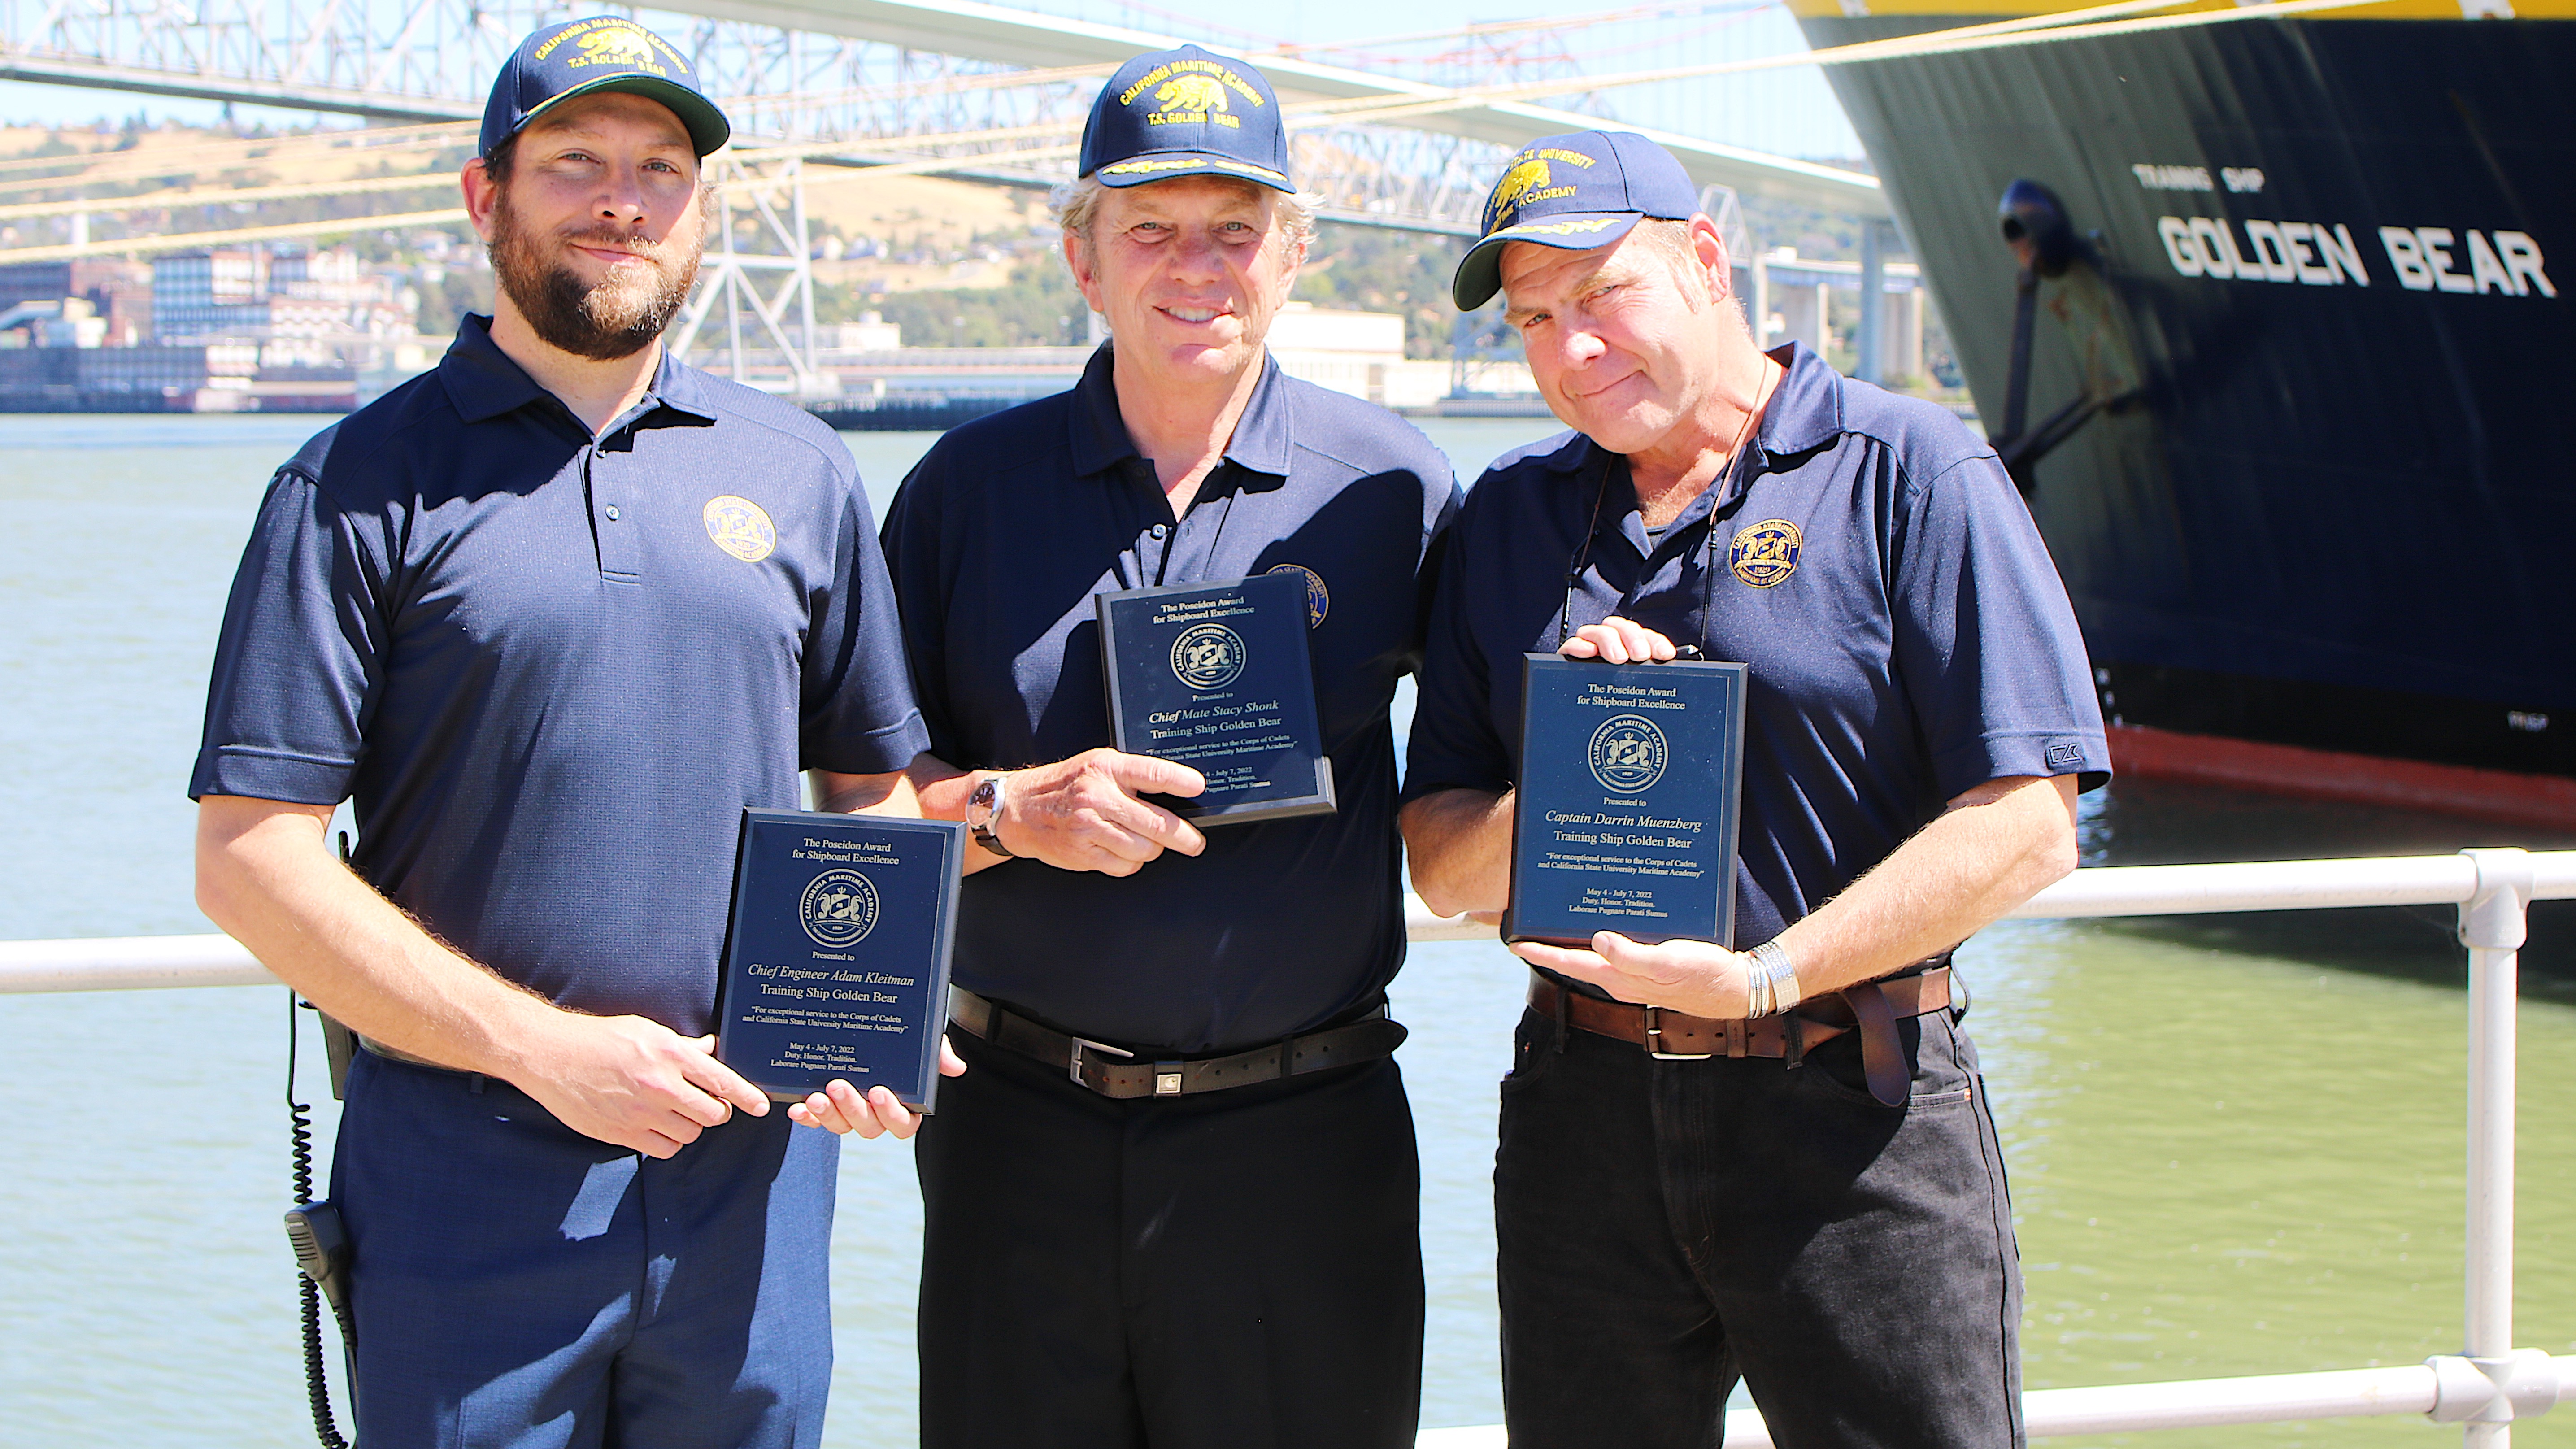 Many thanks to our Alumni "Triad" Crew for ensuring a safe and memorable 2022 #TSGB Summer Cruise. Chief Engineer Adam Kleitman (’12) [L], Chief Mate Stacy Shonk (’81) [M], & Captain Darrin Muenzberg (’96) [R]